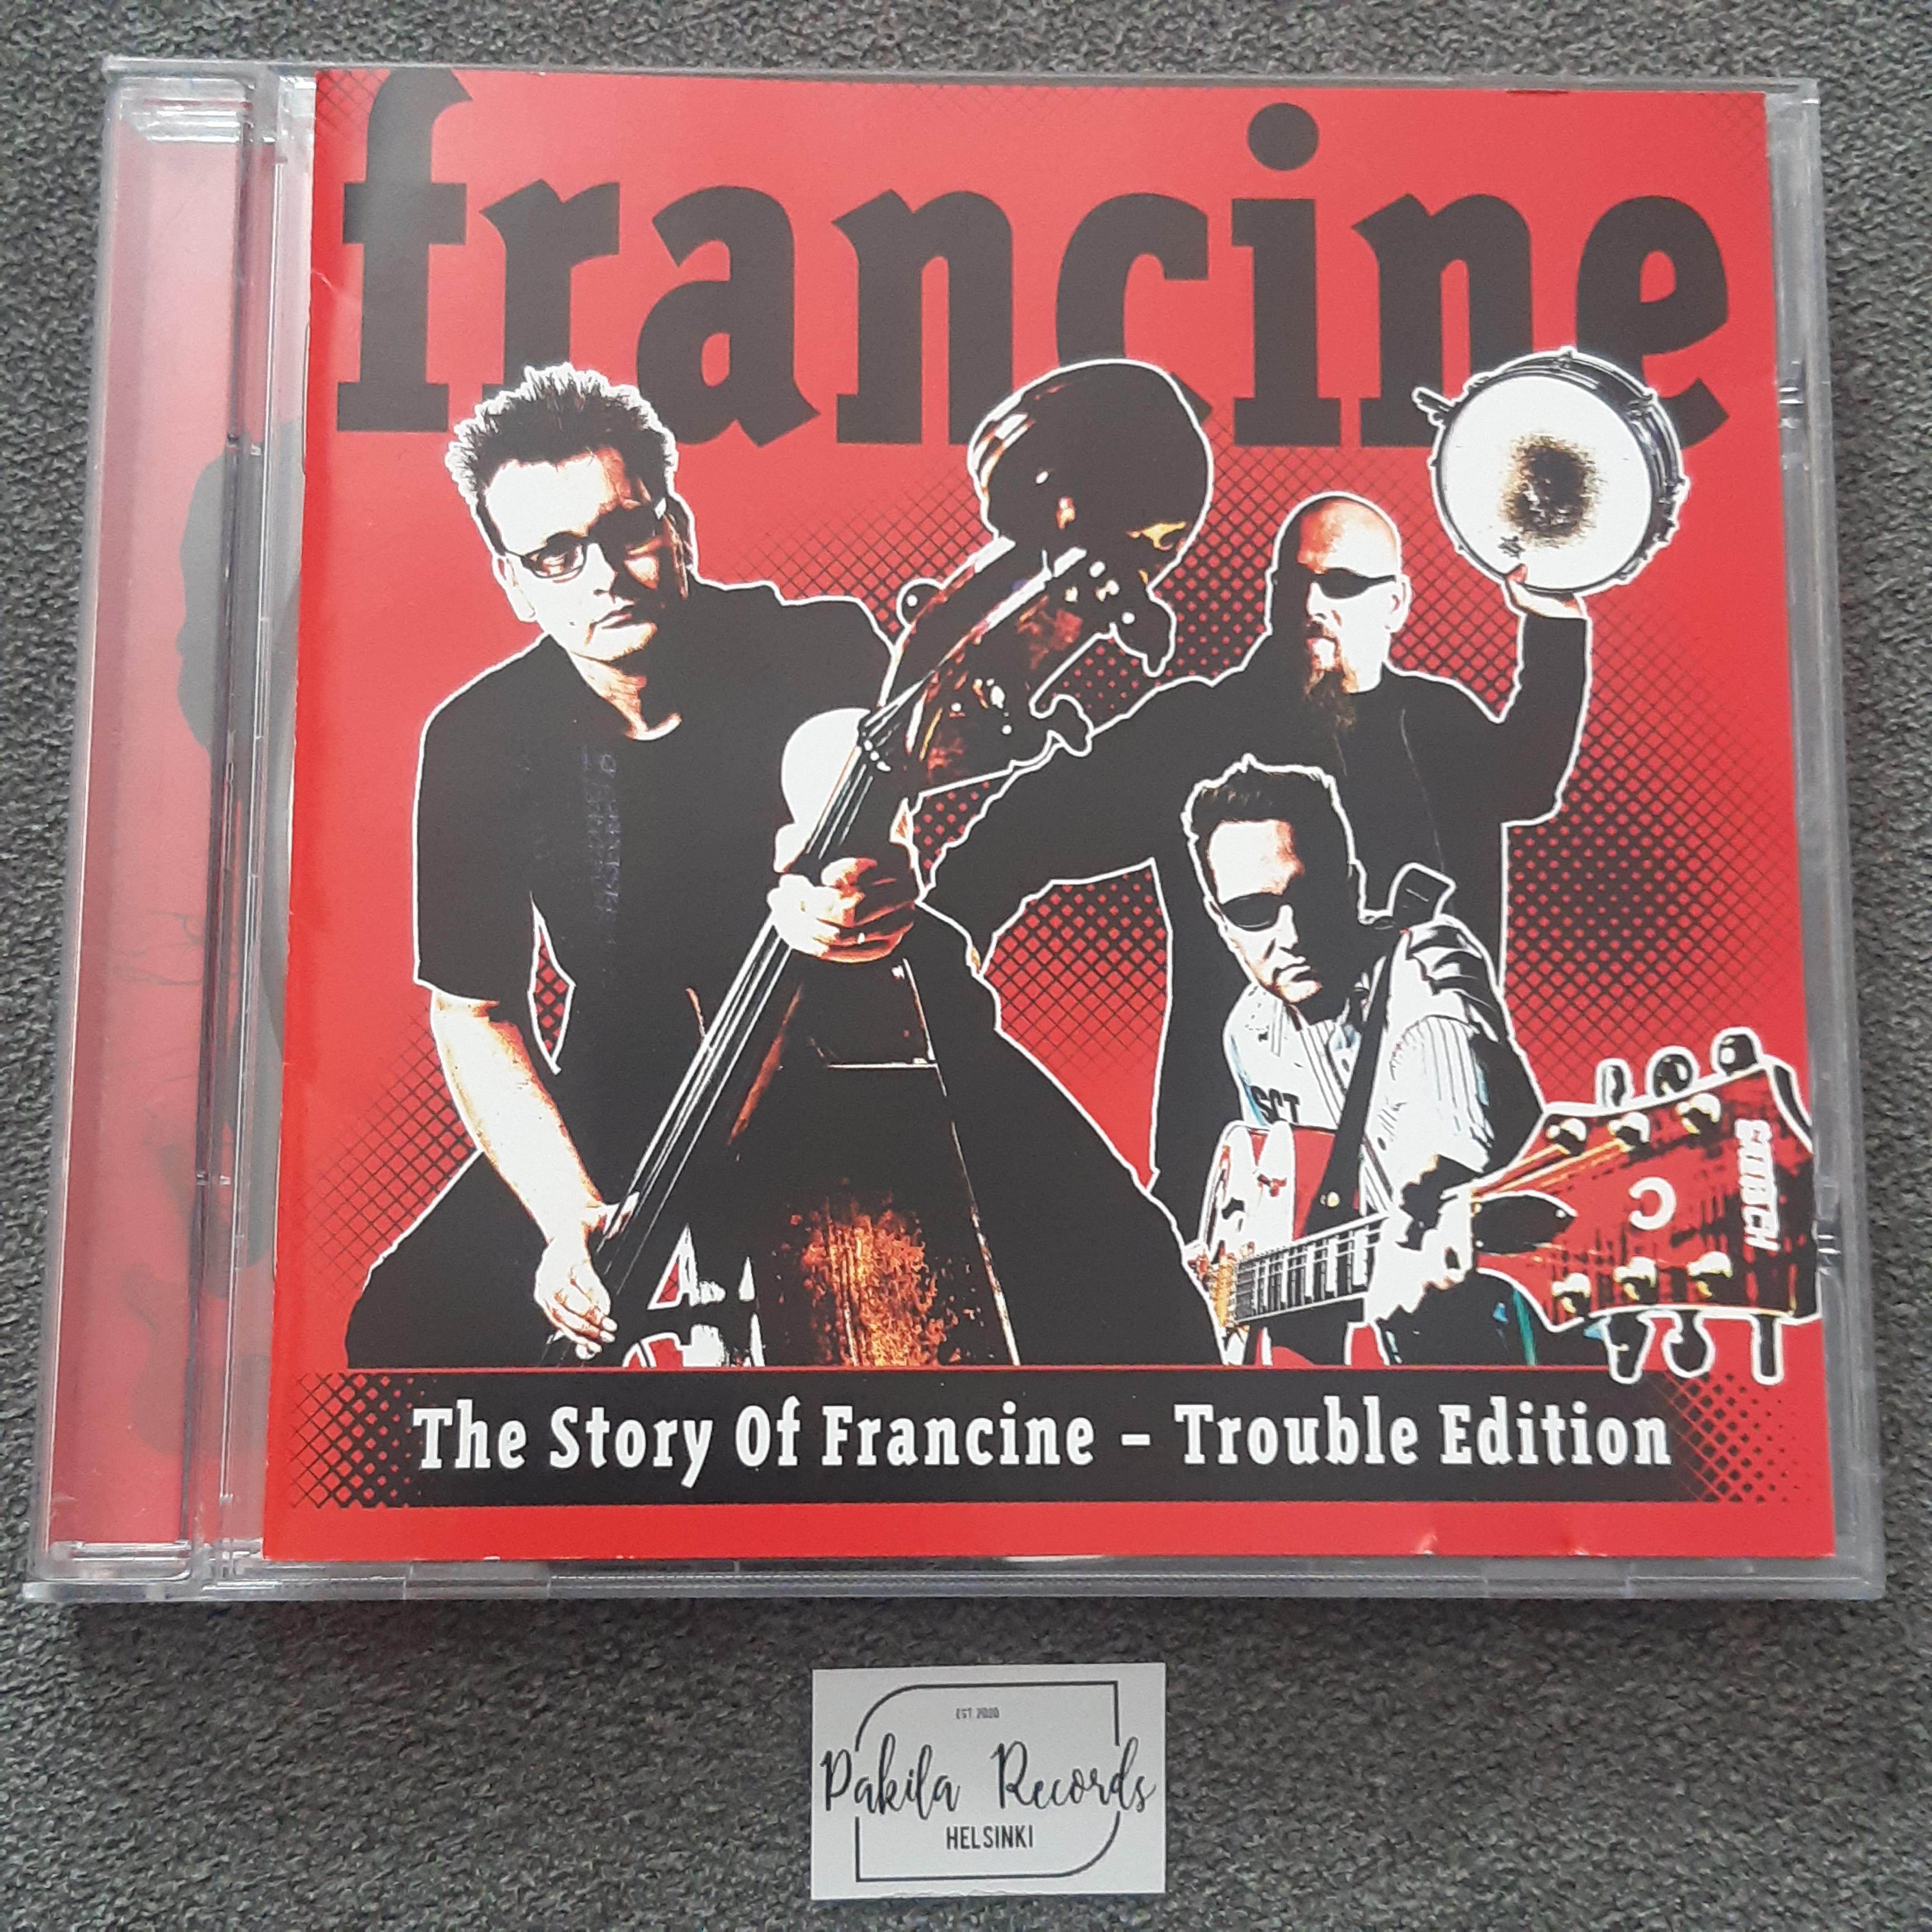 Francine - The Story Of Francine, Trouble Edition - CD (käytetty)